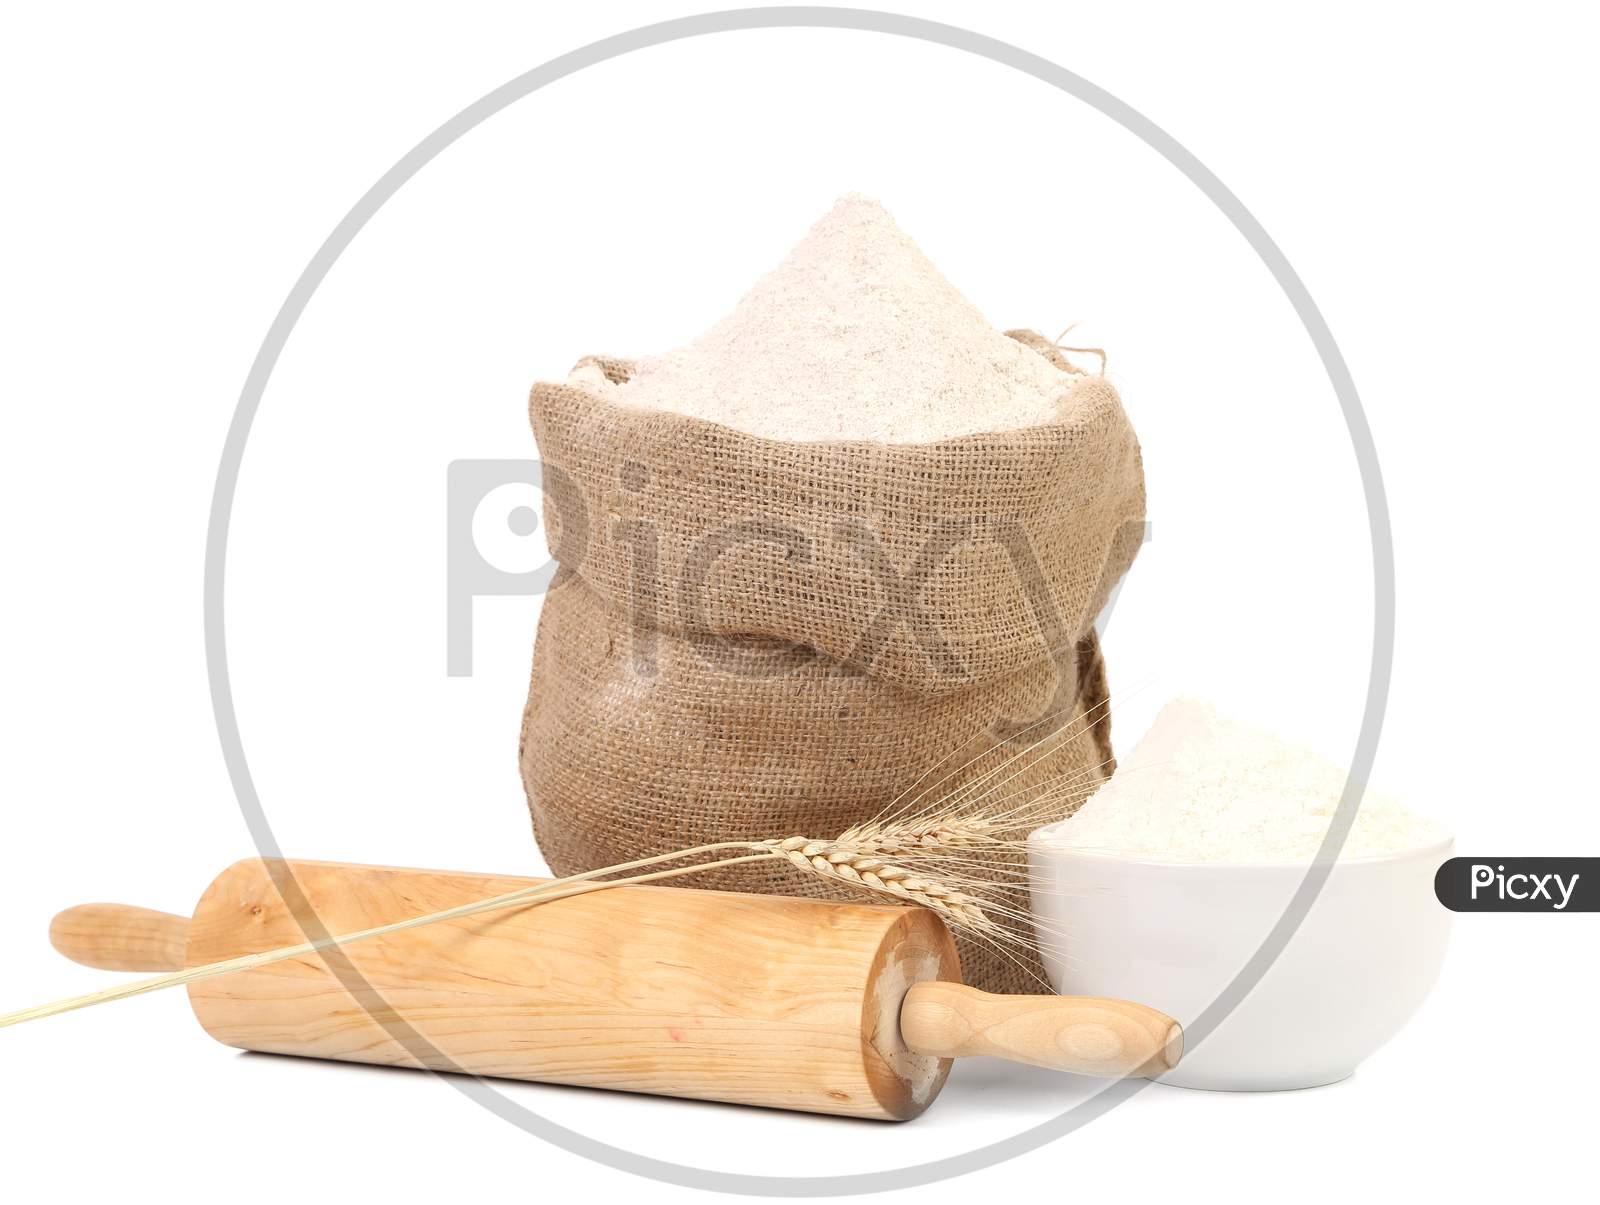 White Flour And Rolling Pin. Isolated On A White Background.